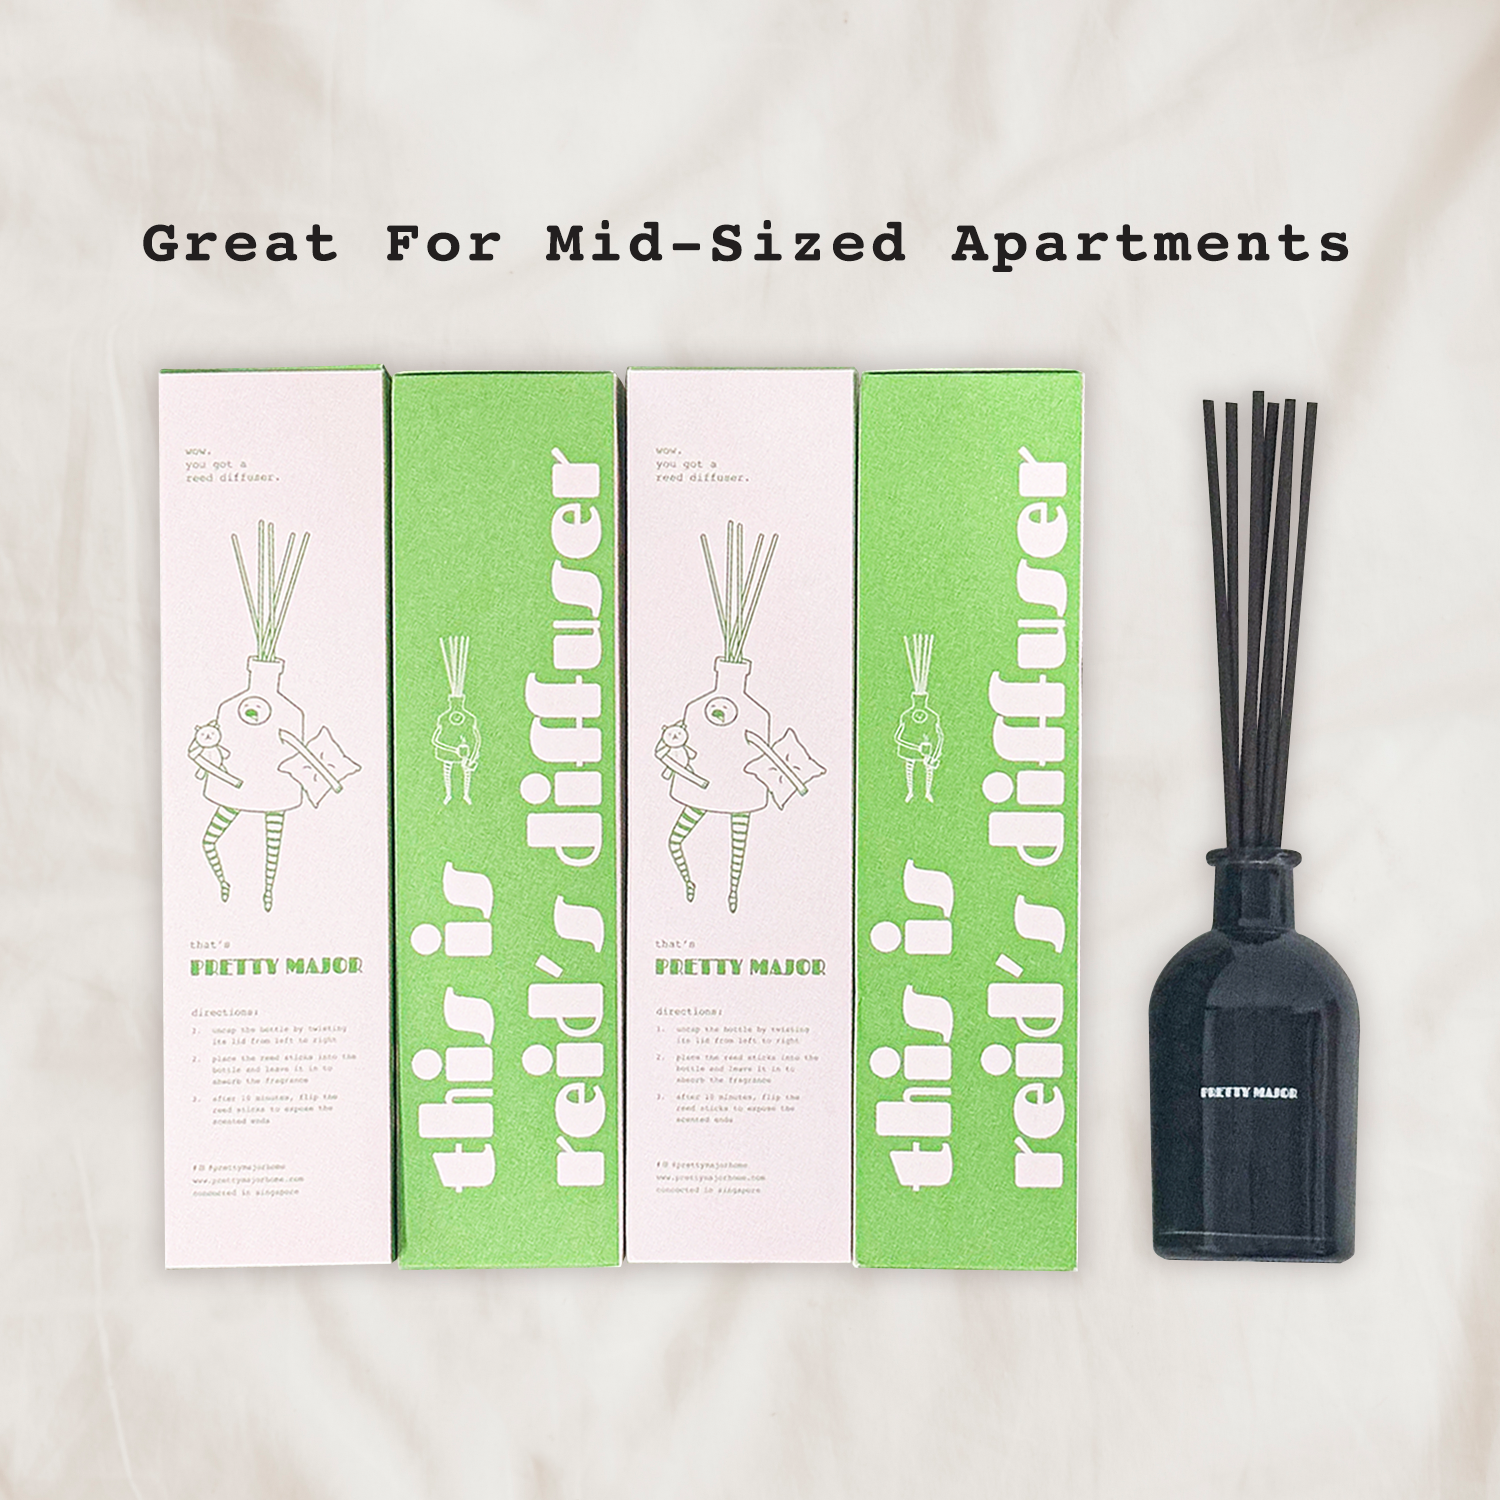 4 room reed diffuser subscription for mid-sized apartments